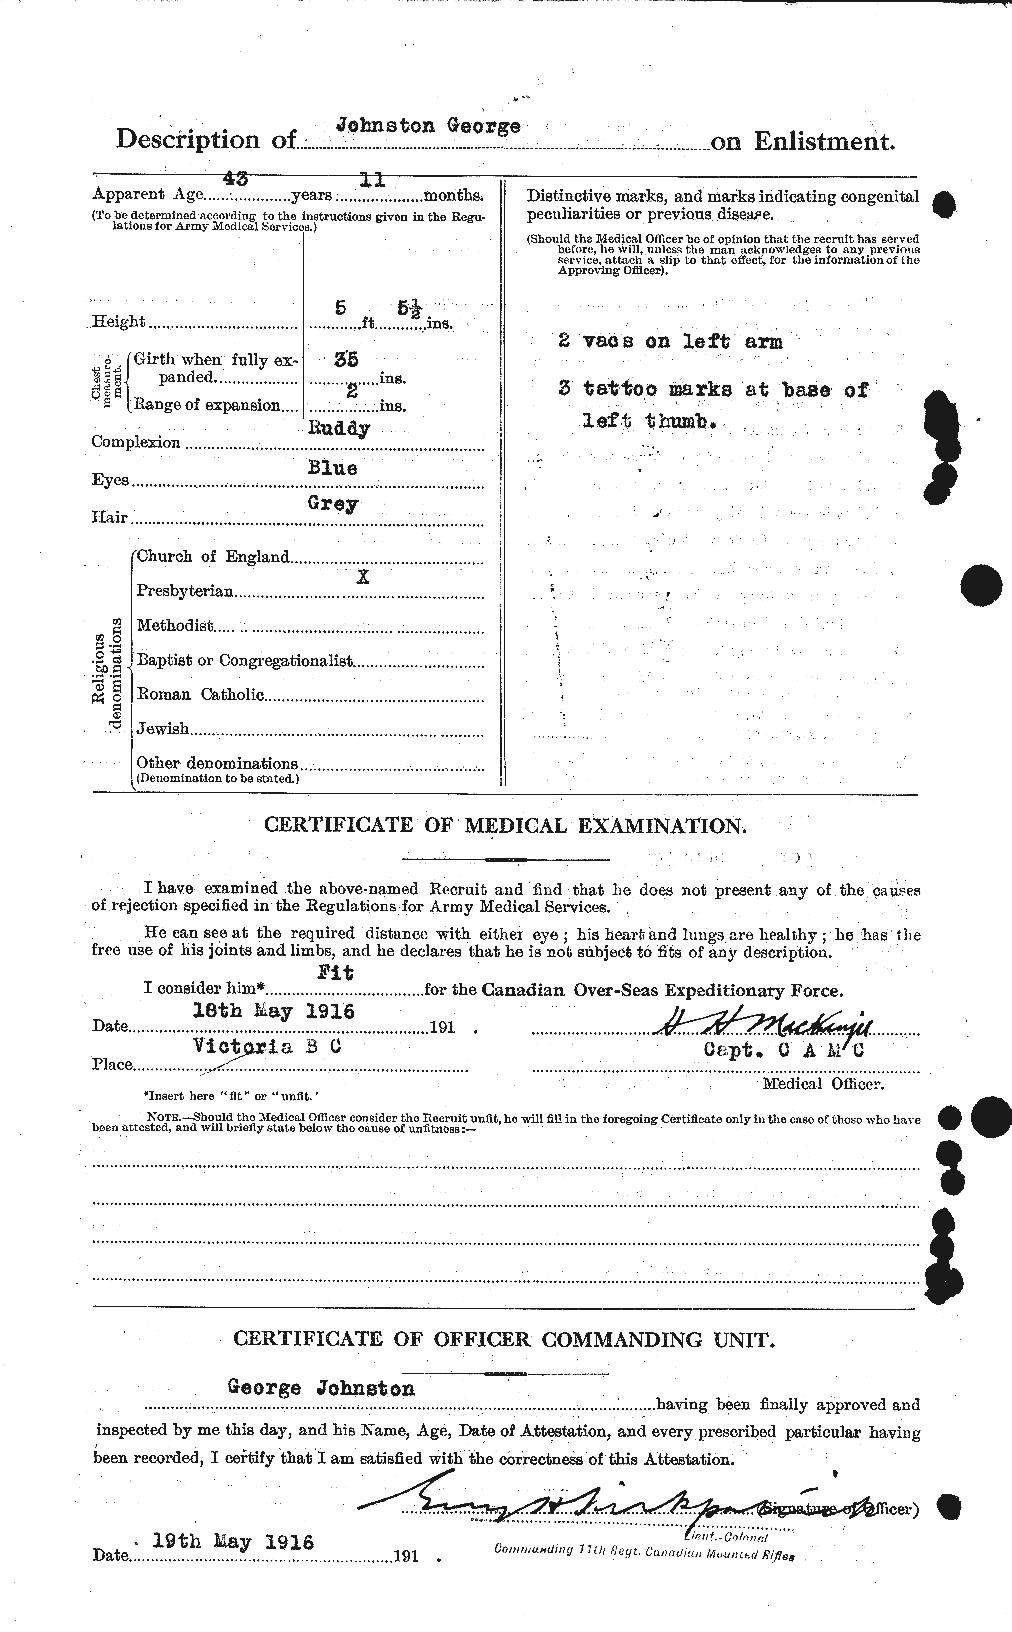 Personnel Records of the First World War - CEF 424095b